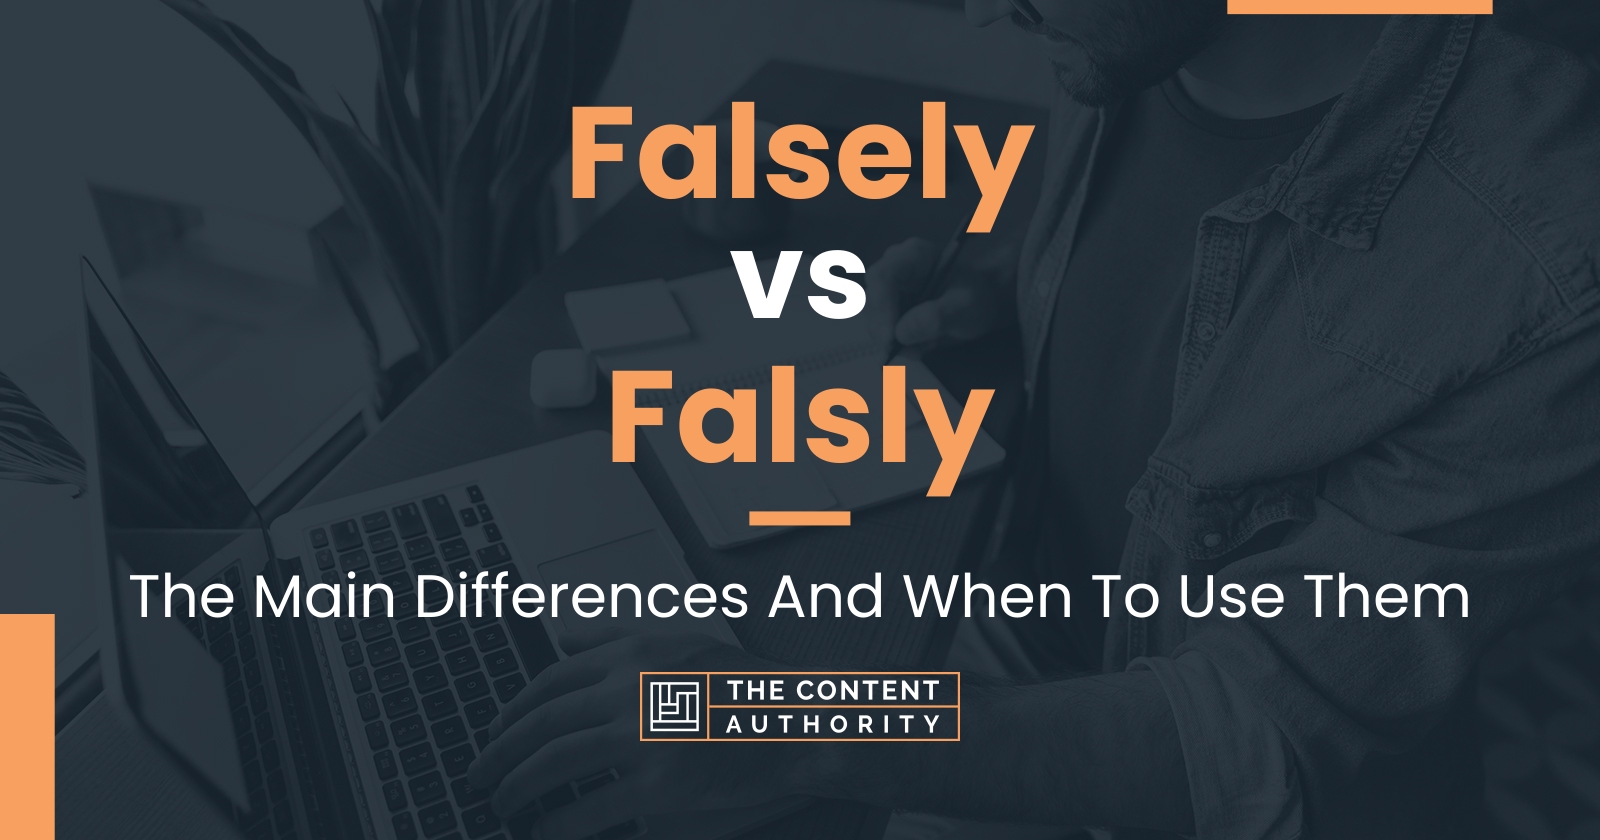 Falsely vs Falsly: The Main Differences And When To Use Them